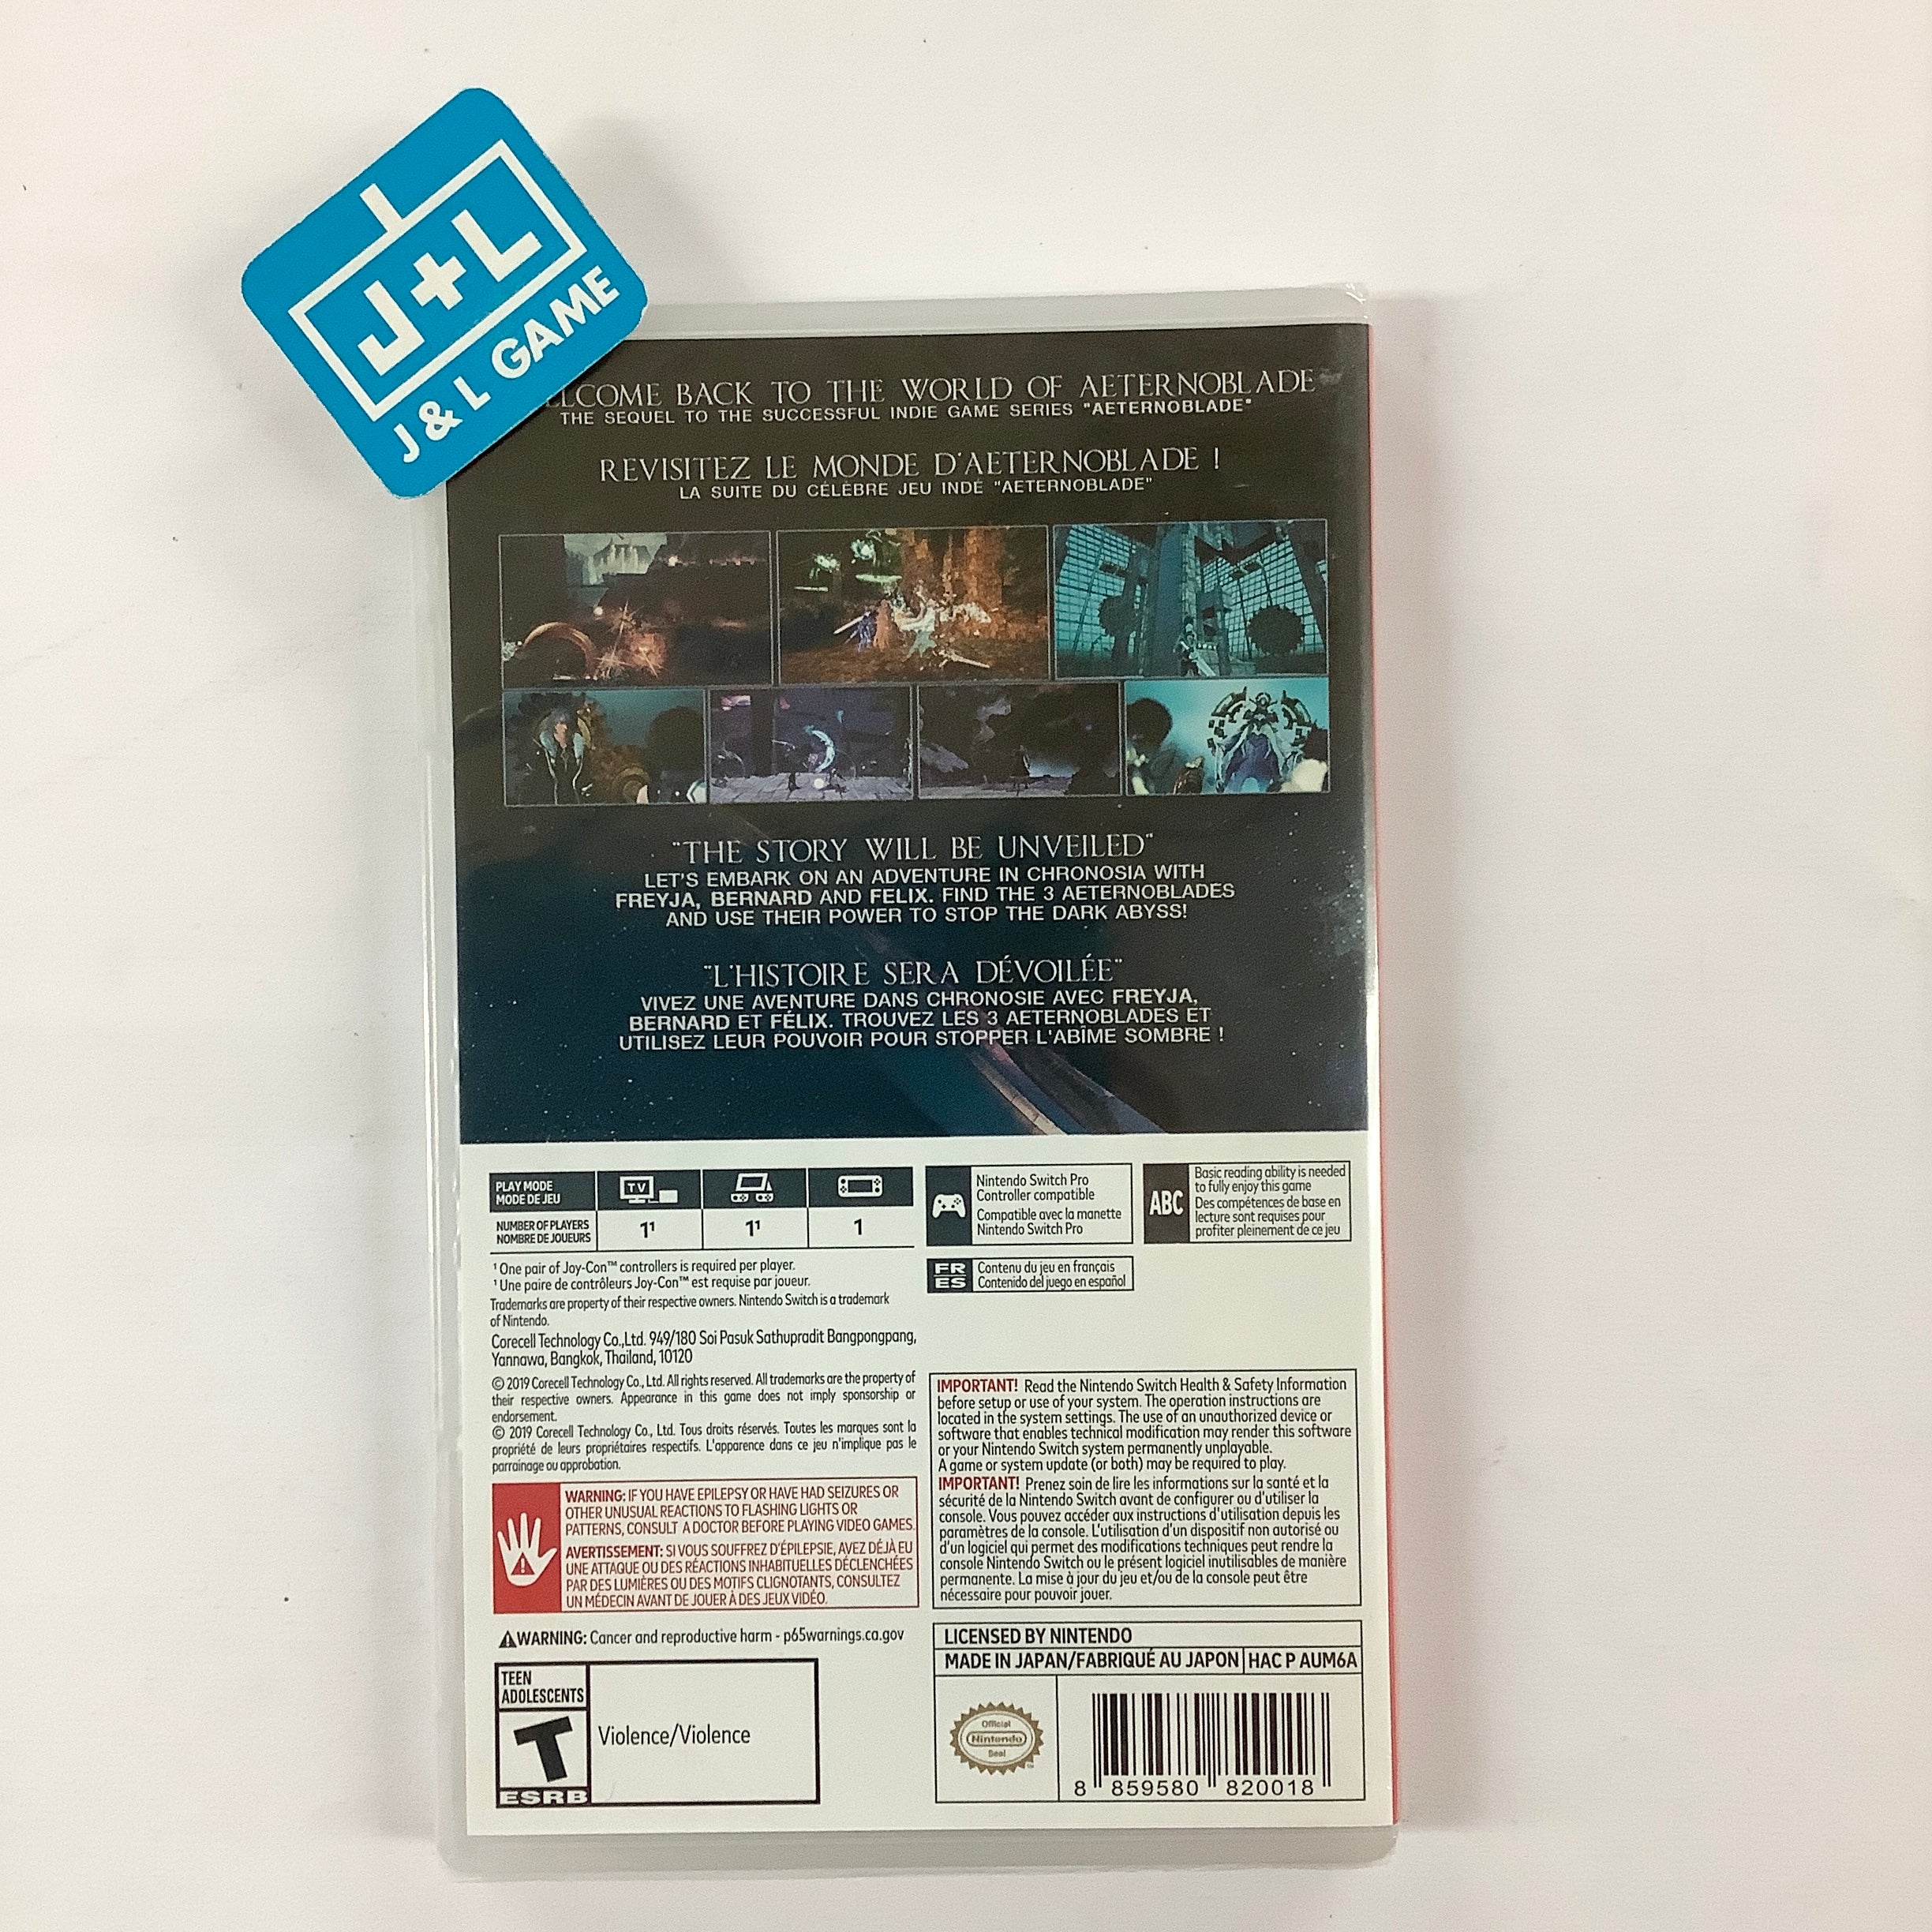 AeternoBlade II - (NSW) Nintendo Switch Video Games Corecell Technology   